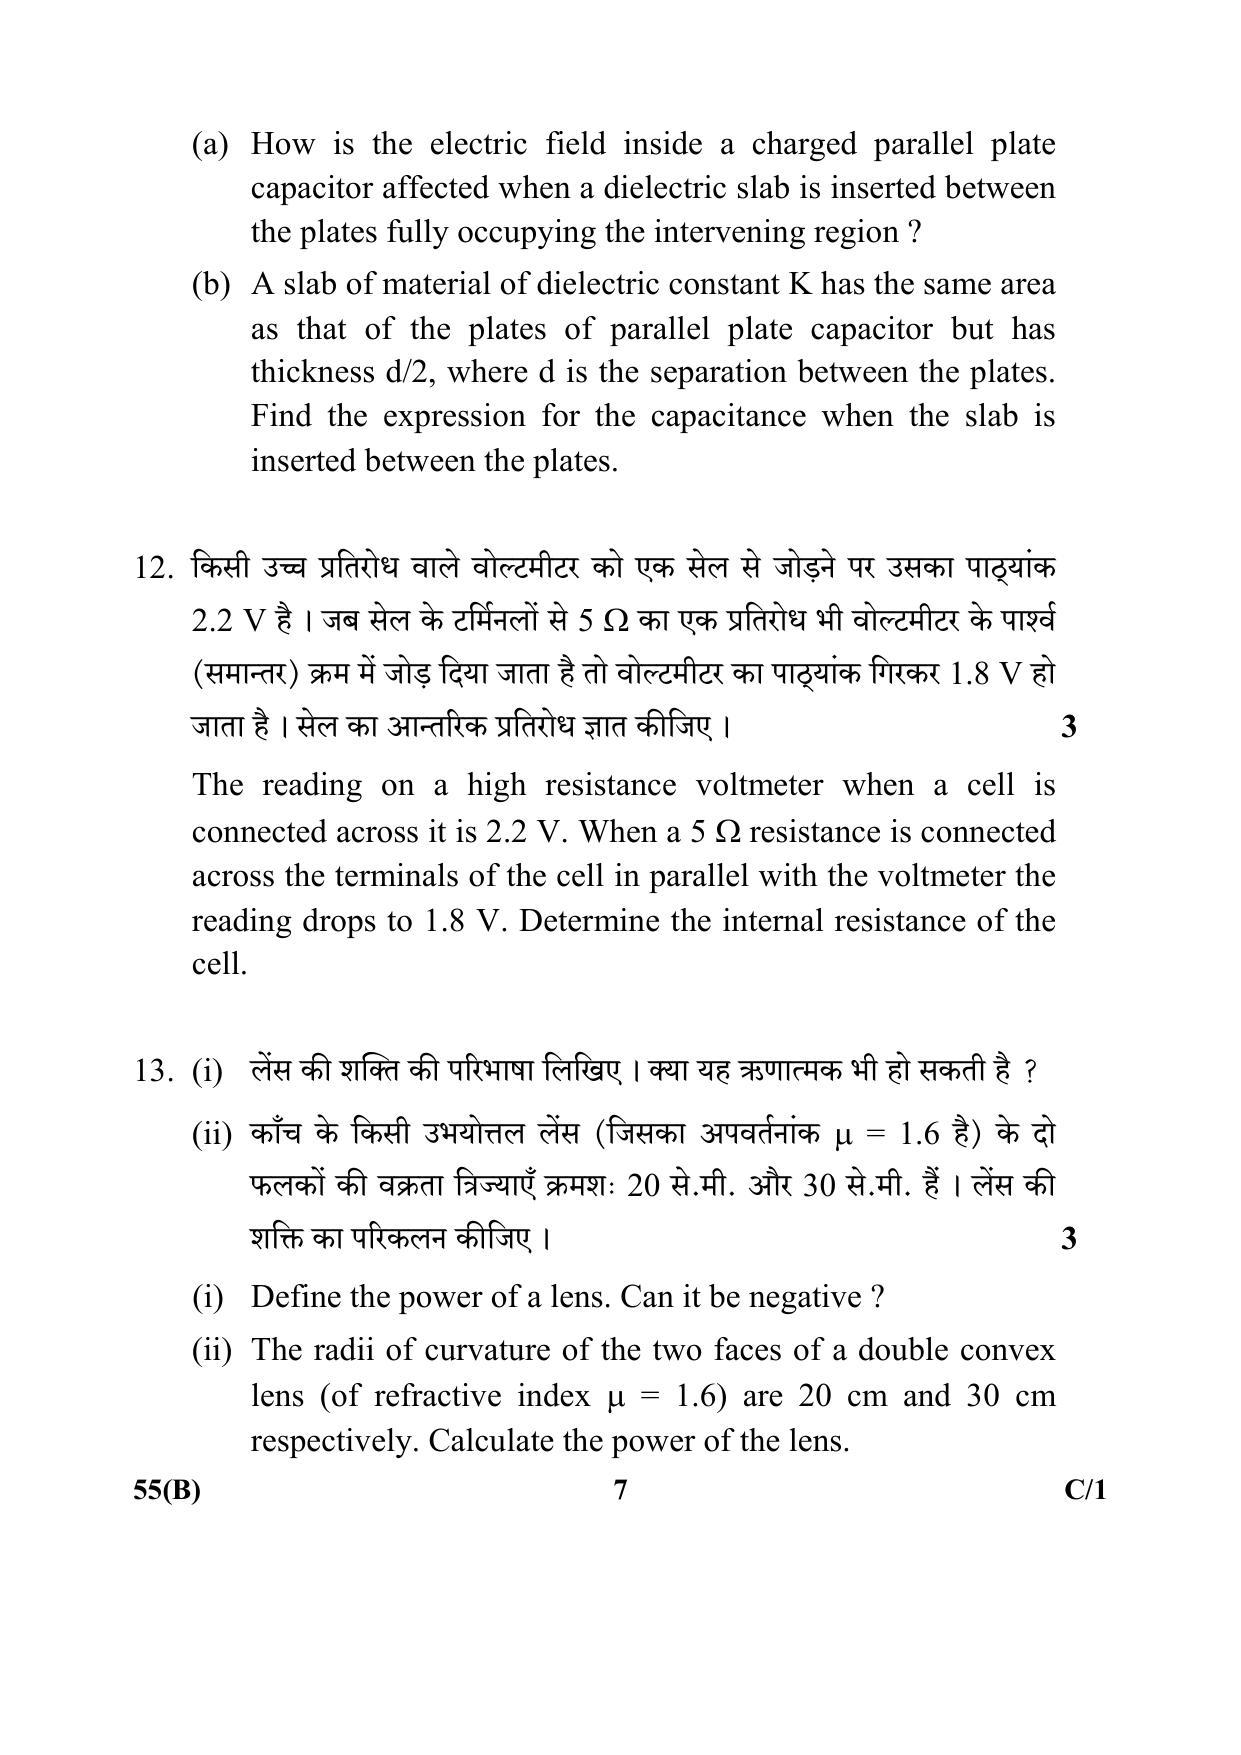 CBSE Class 12 55(B) (Physics) 2018 Compartment Question Paper - Page 7